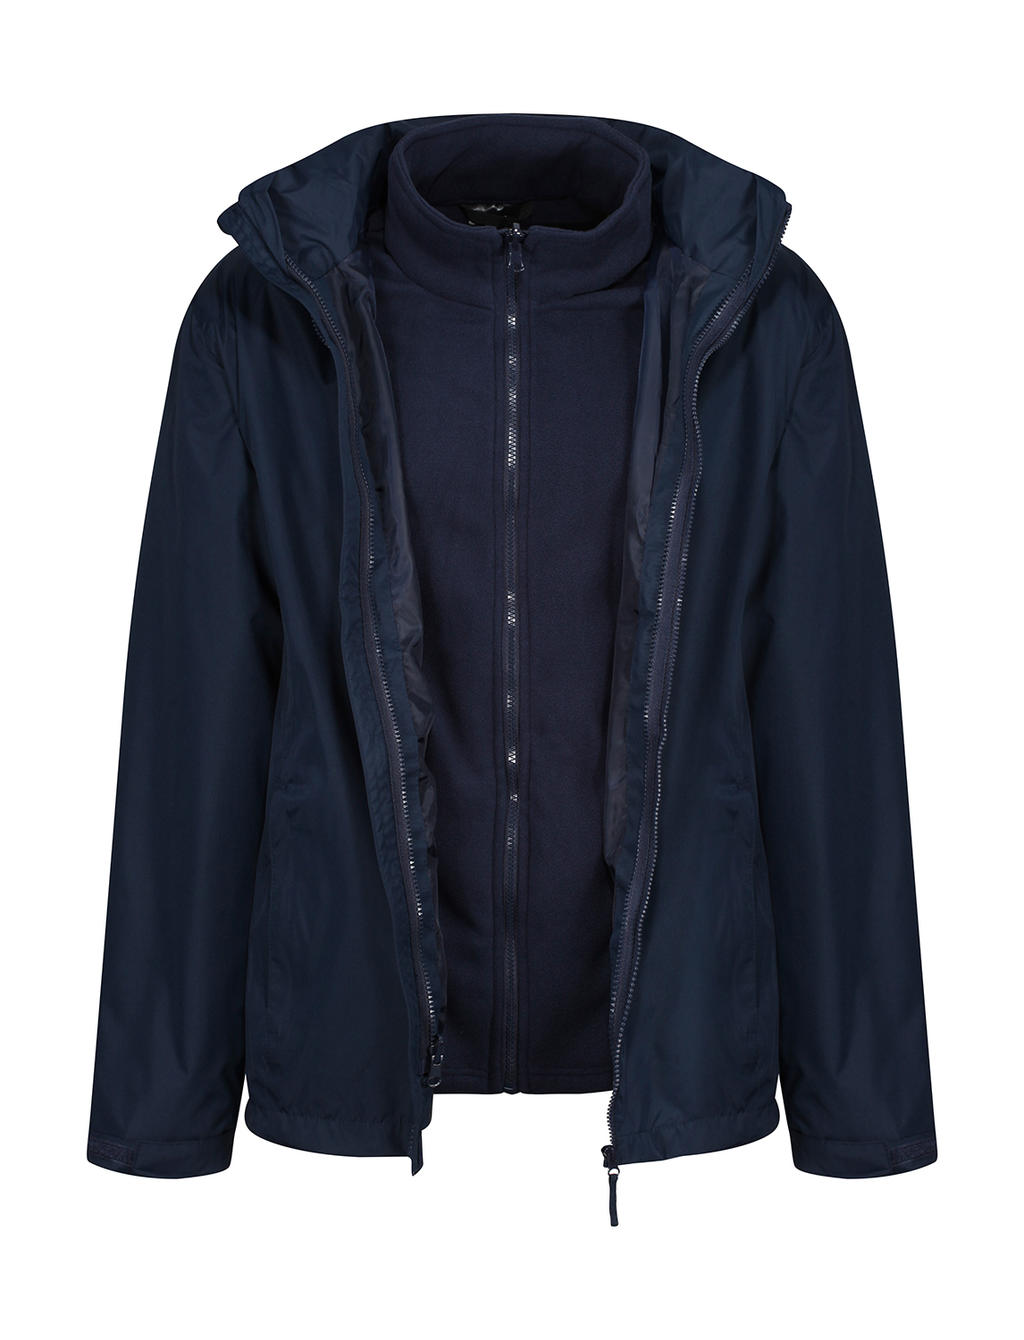  Classic 3-in-1 Jacket in Farbe Navy